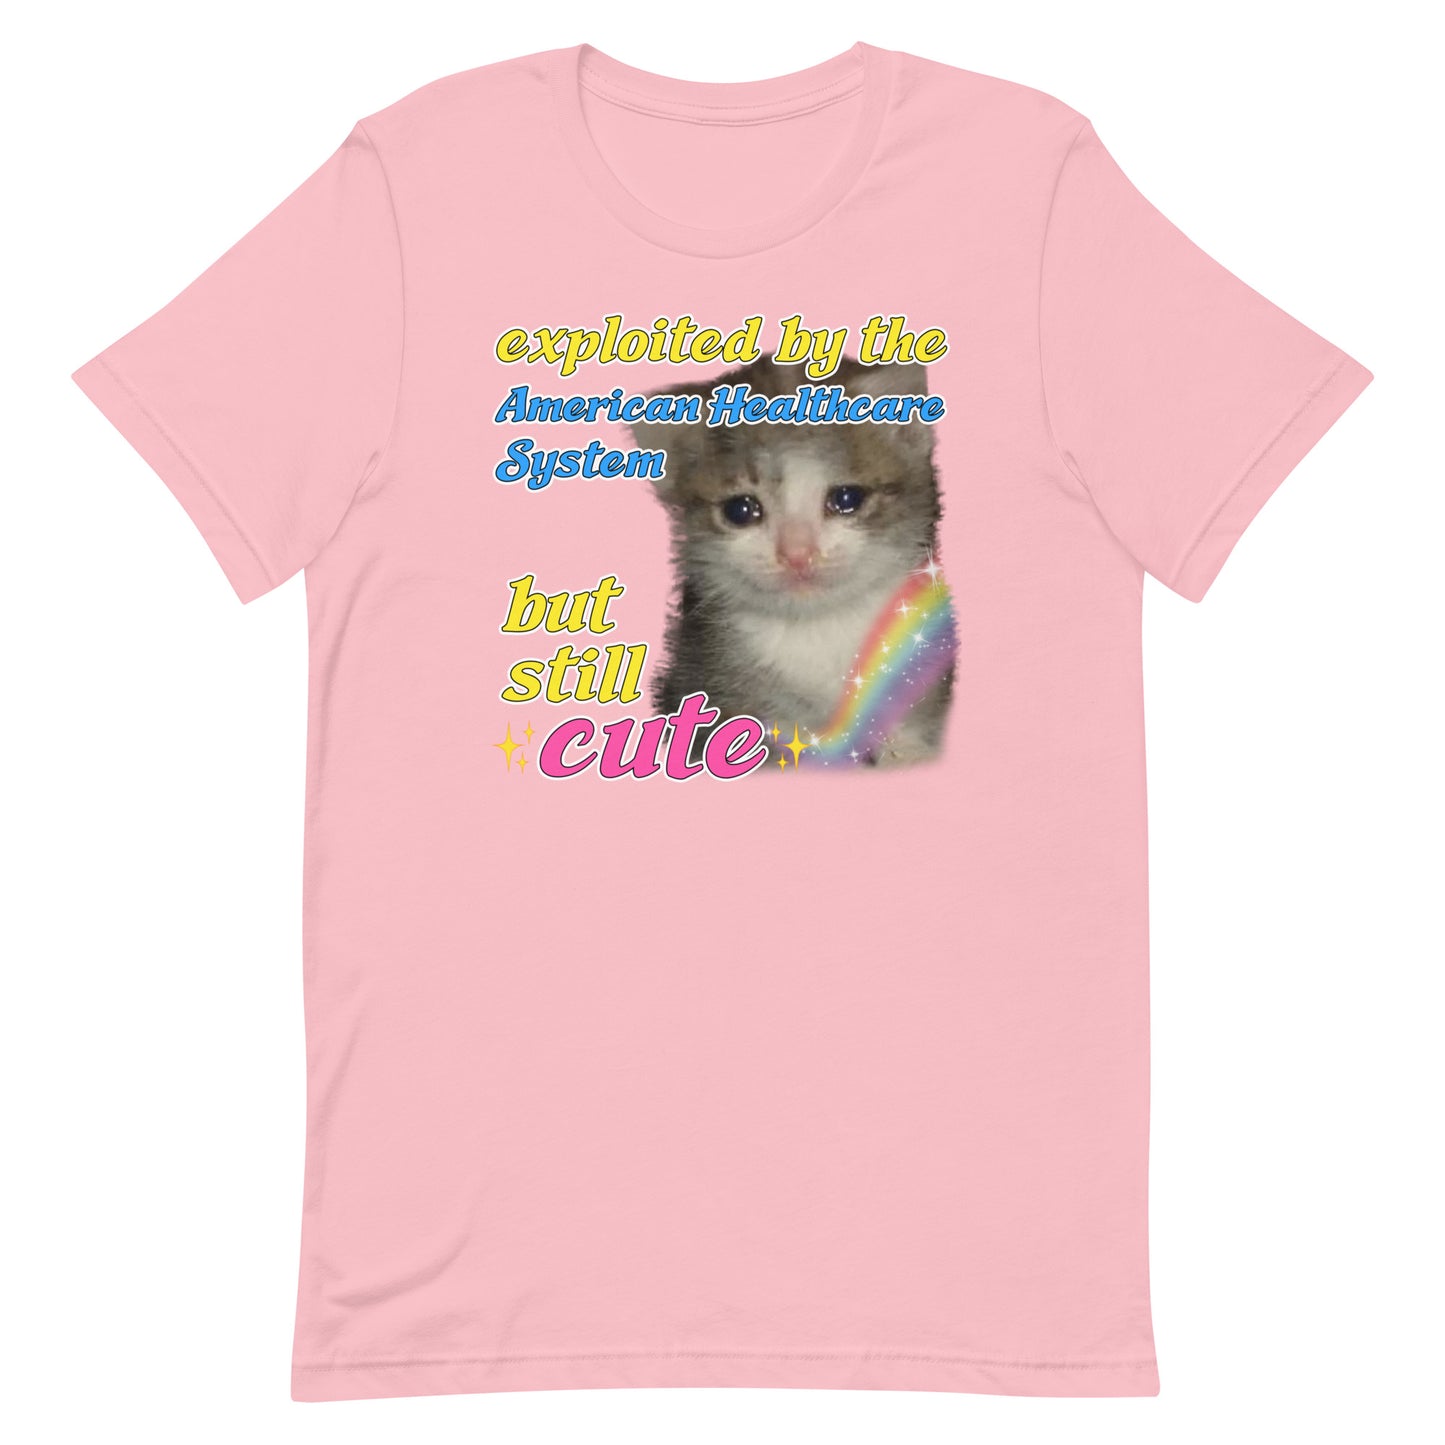 Exploited by the American Healthcare System Cat Tee